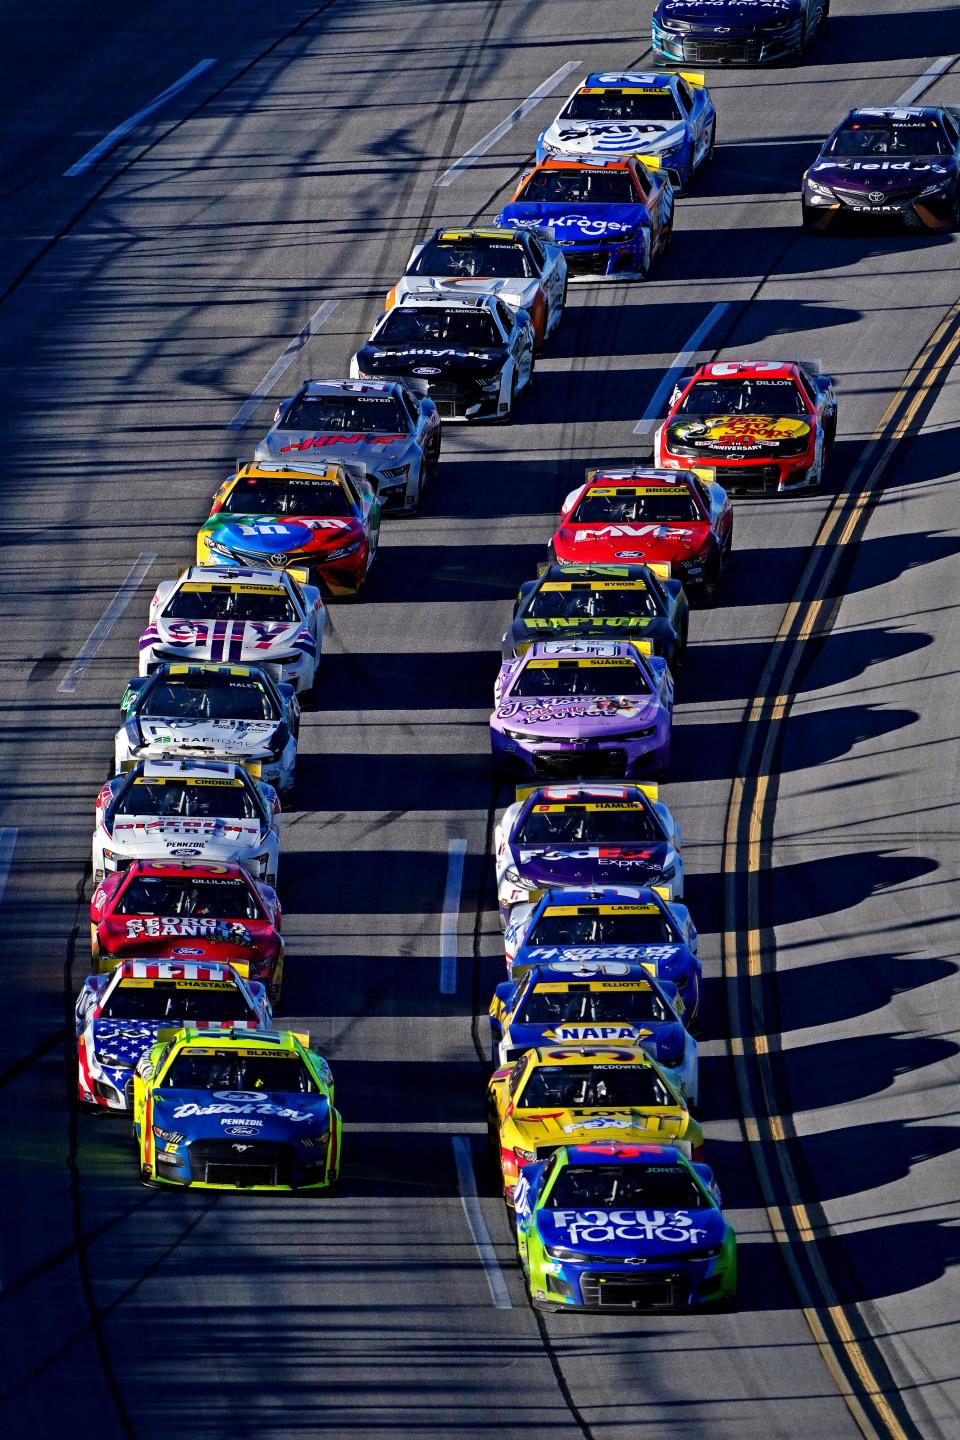 Erik Jones (43) leads the field during the NASCAR Cup Series playoff race at Talladega Superspeedway on Oct. 2, 2022.